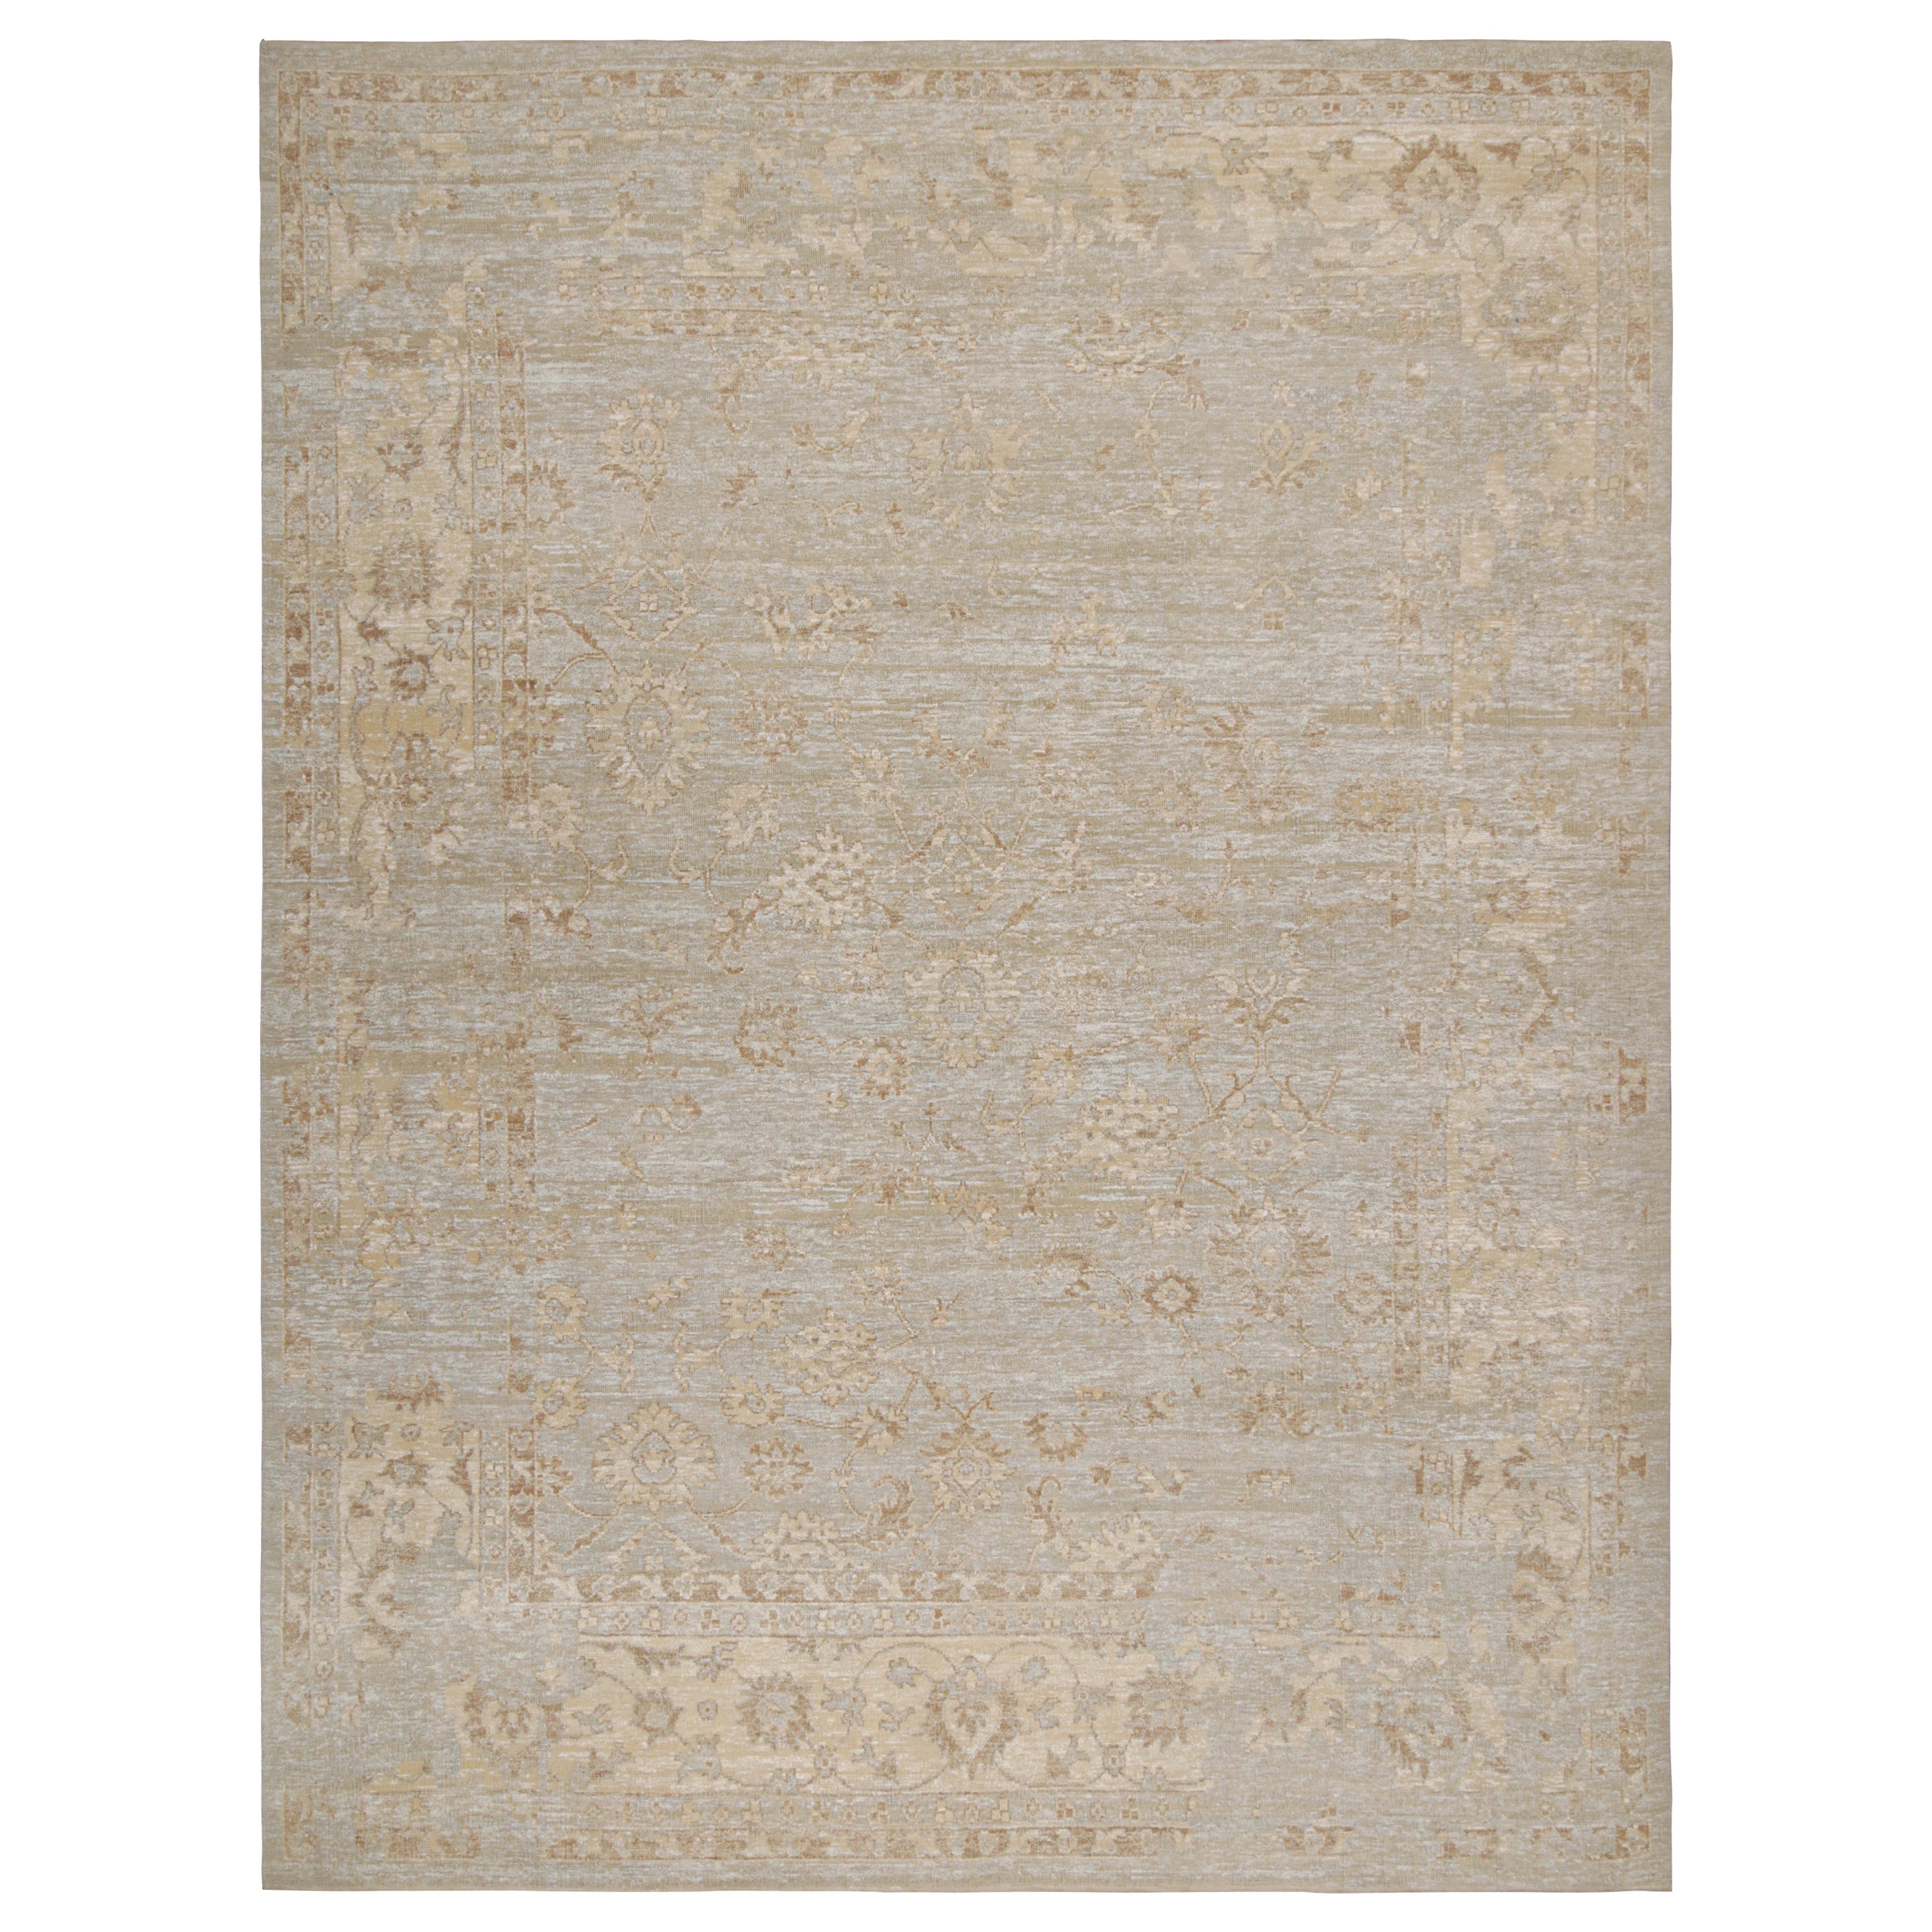 Rug & Kilim’s Oushak Style Rug in Beige-Brown & White Geometric Patterns For Sale